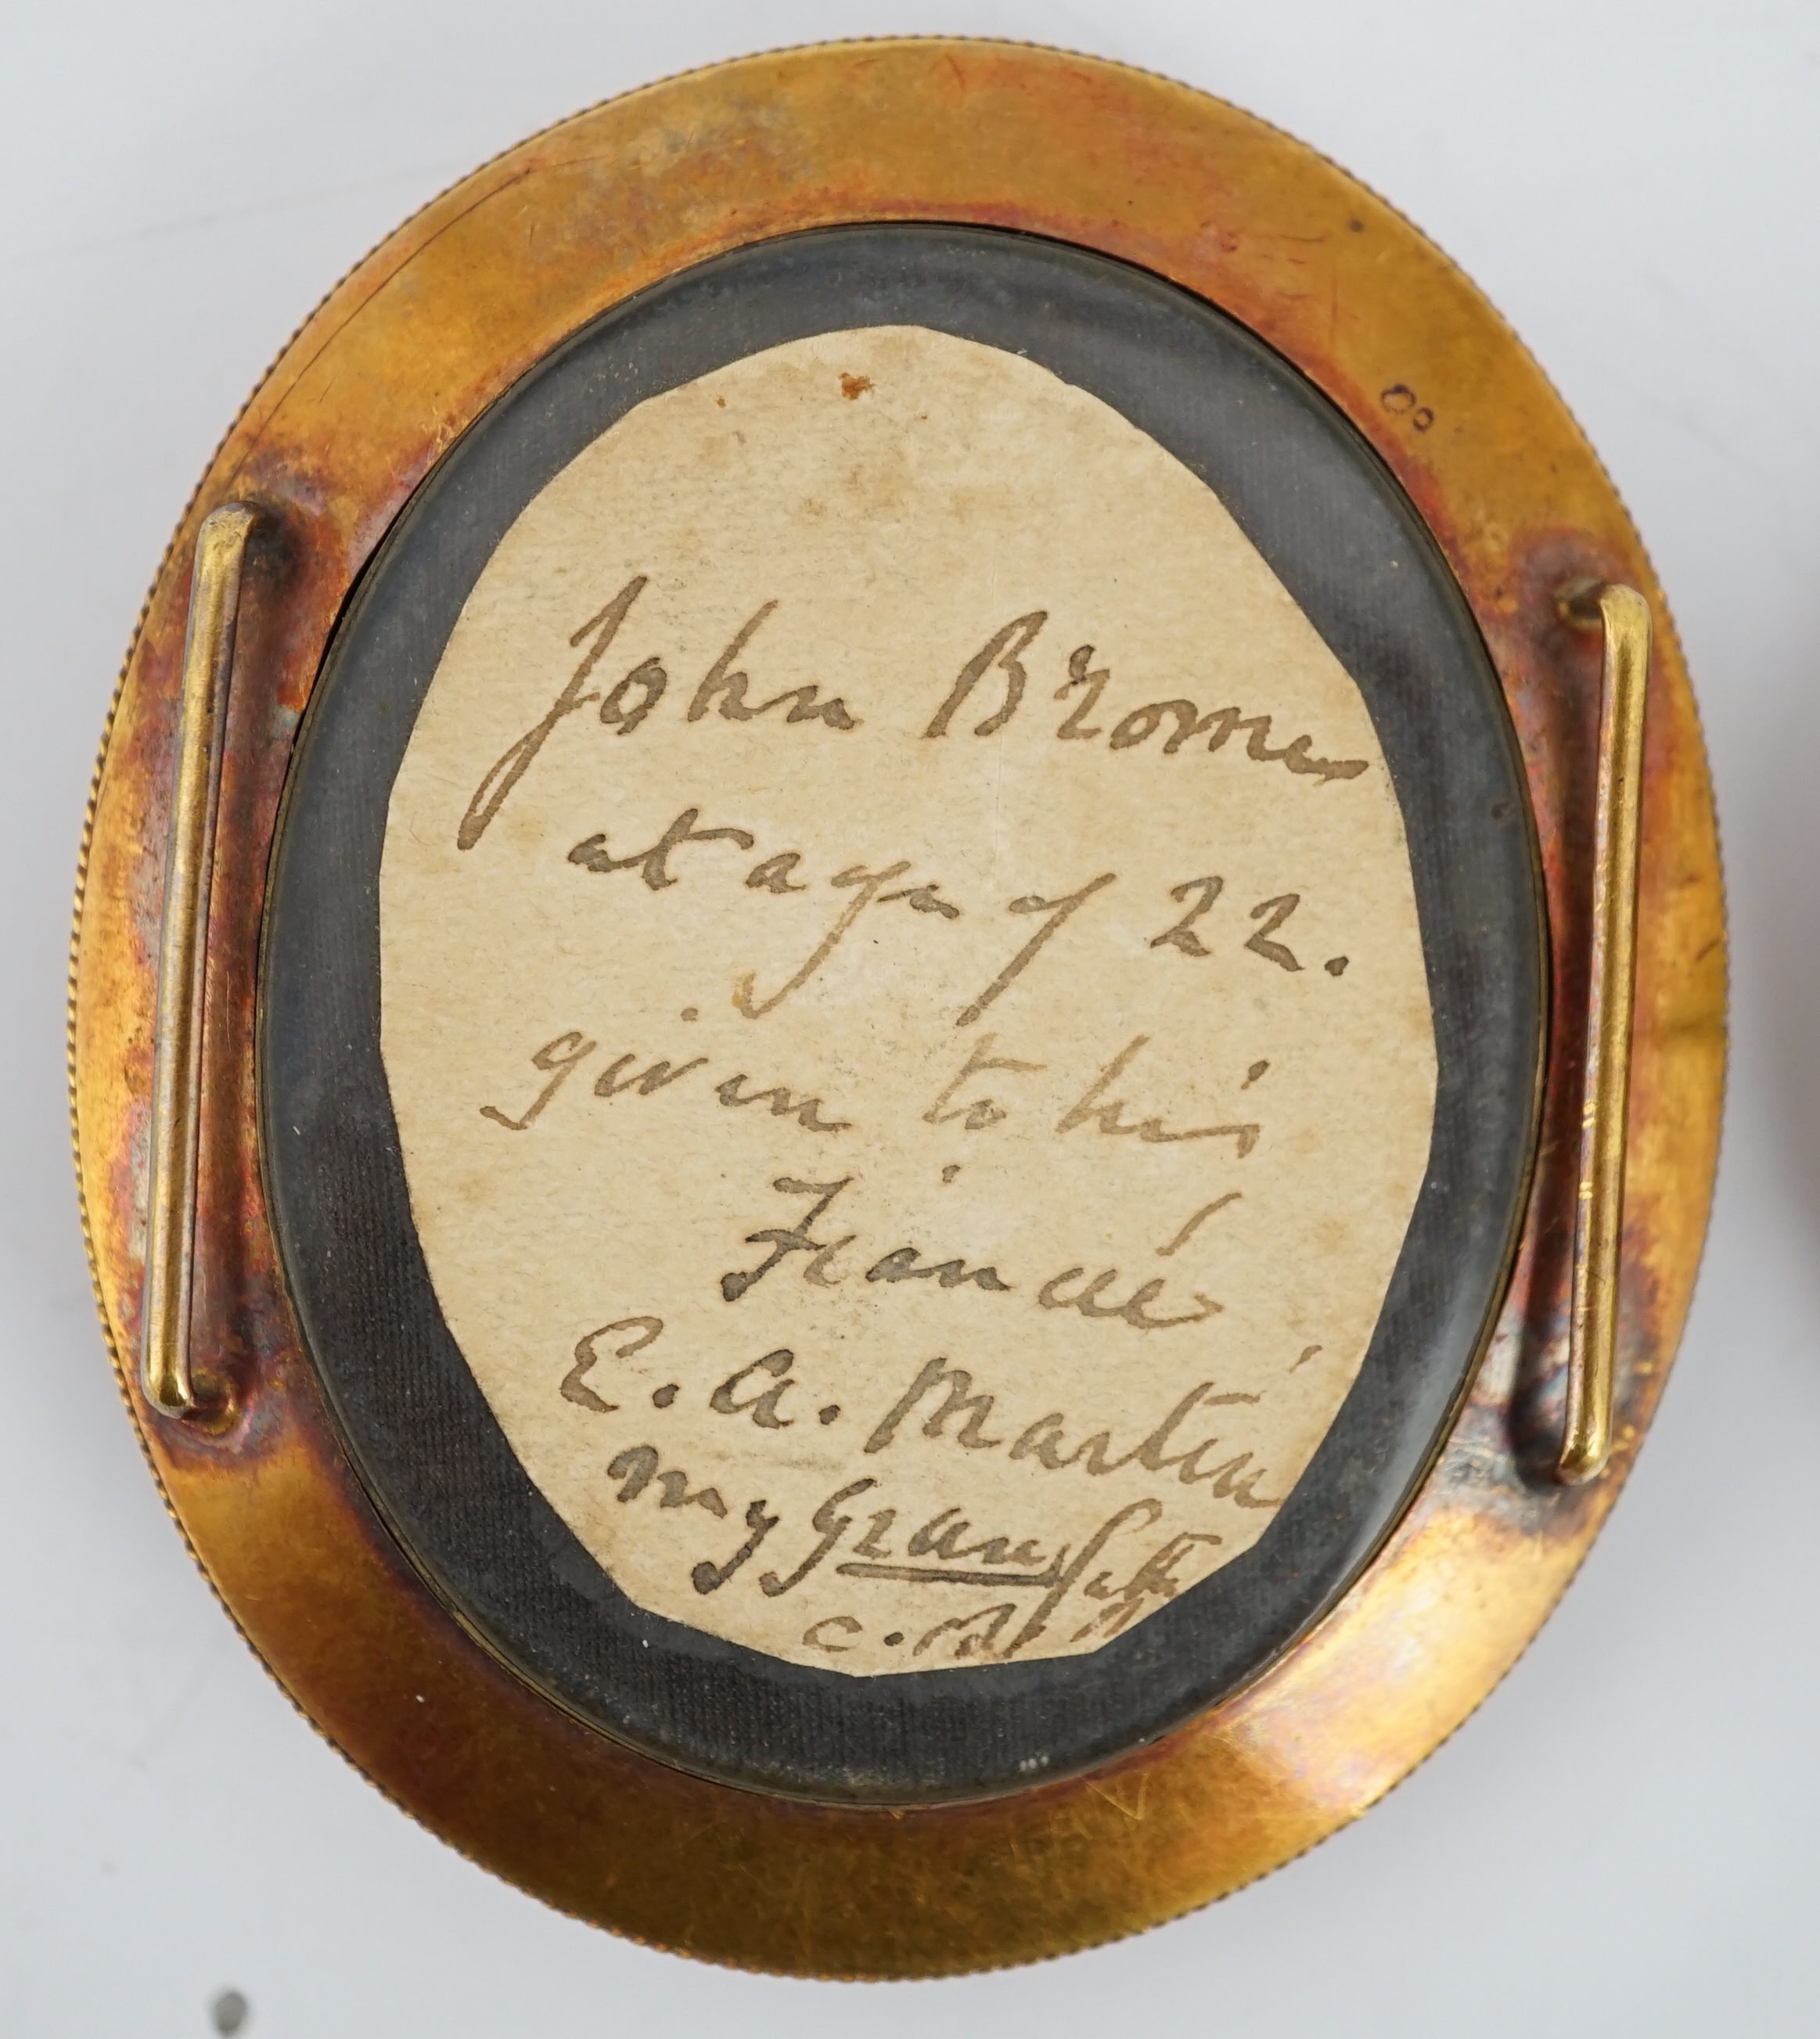 English School circa 1800, Portrait miniatures of John and Elizabeth Brome, oil on ivory (2), 4.6 x 3.8cm. & 3 x 2.3cm. CITES Submission reference 8CK25C1N